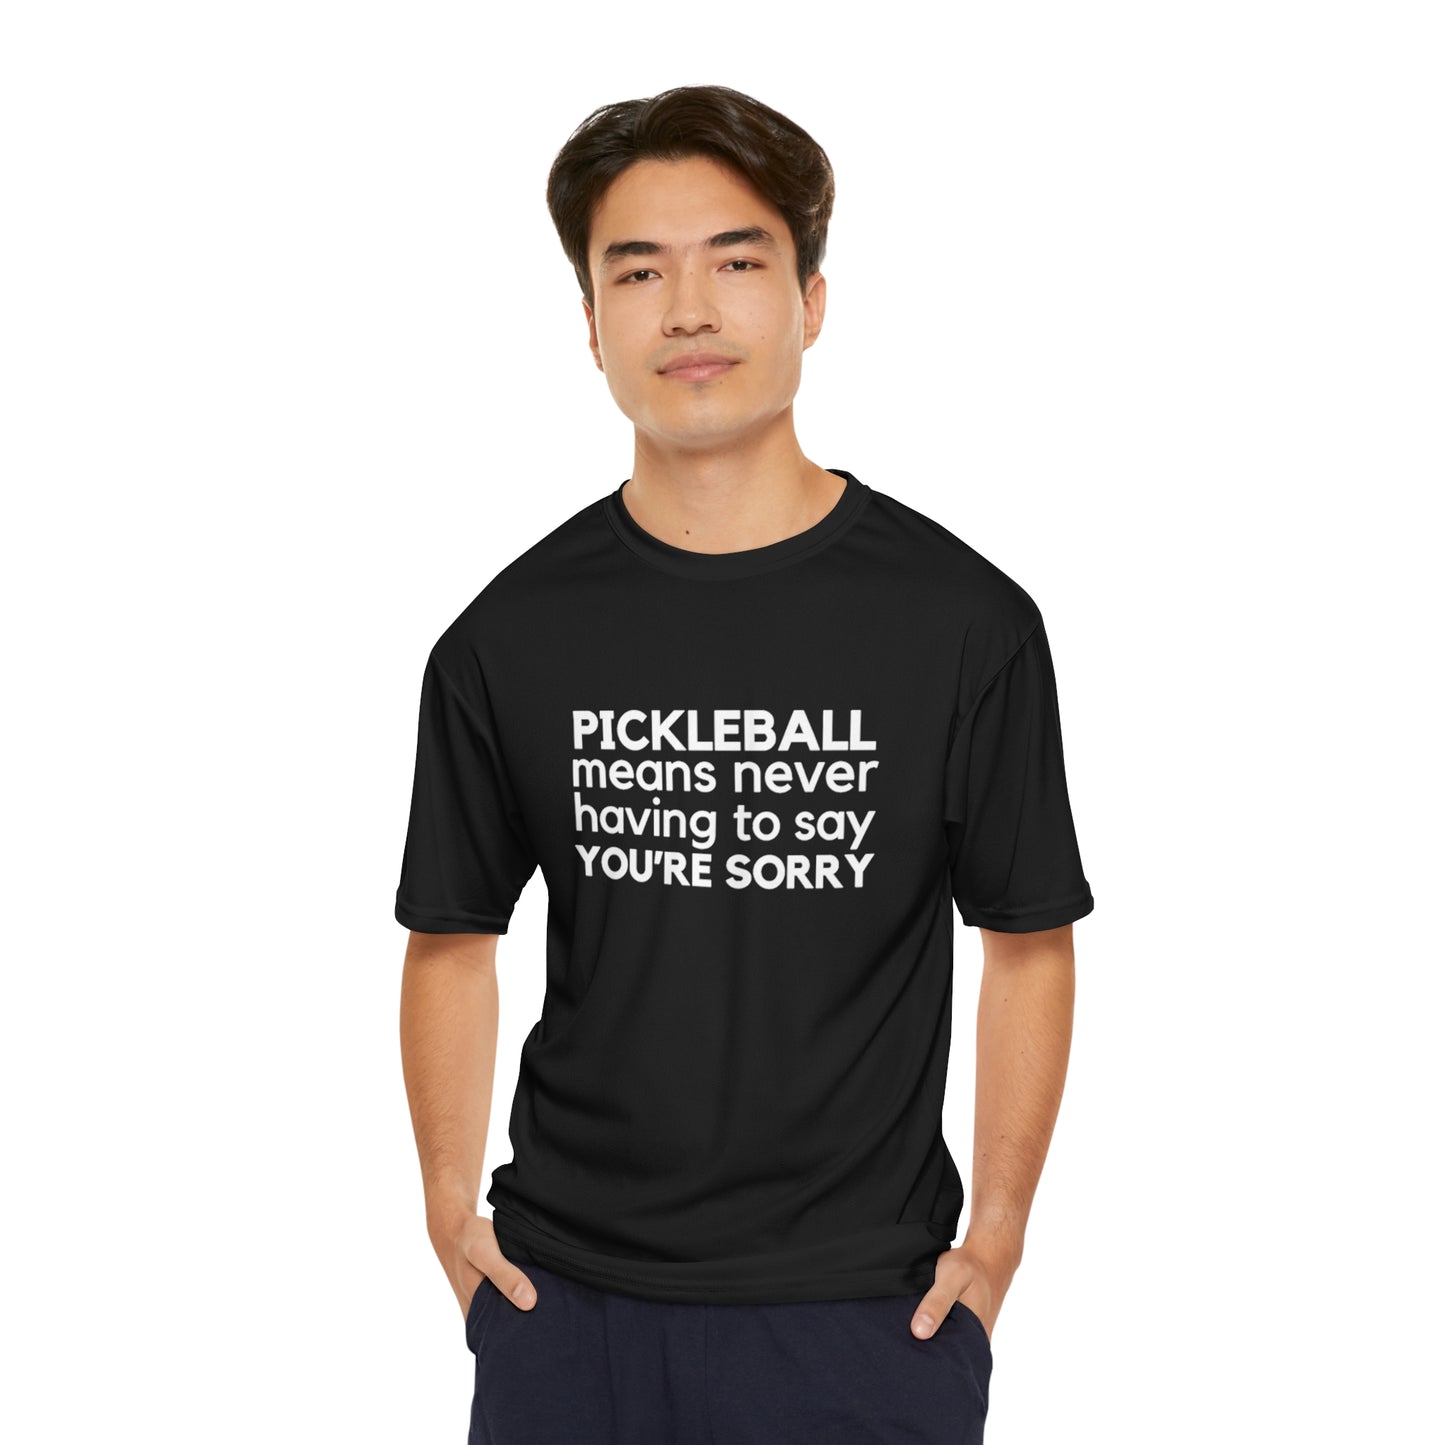 Pickleball Means Never Having To Say You're Sorry. Performance